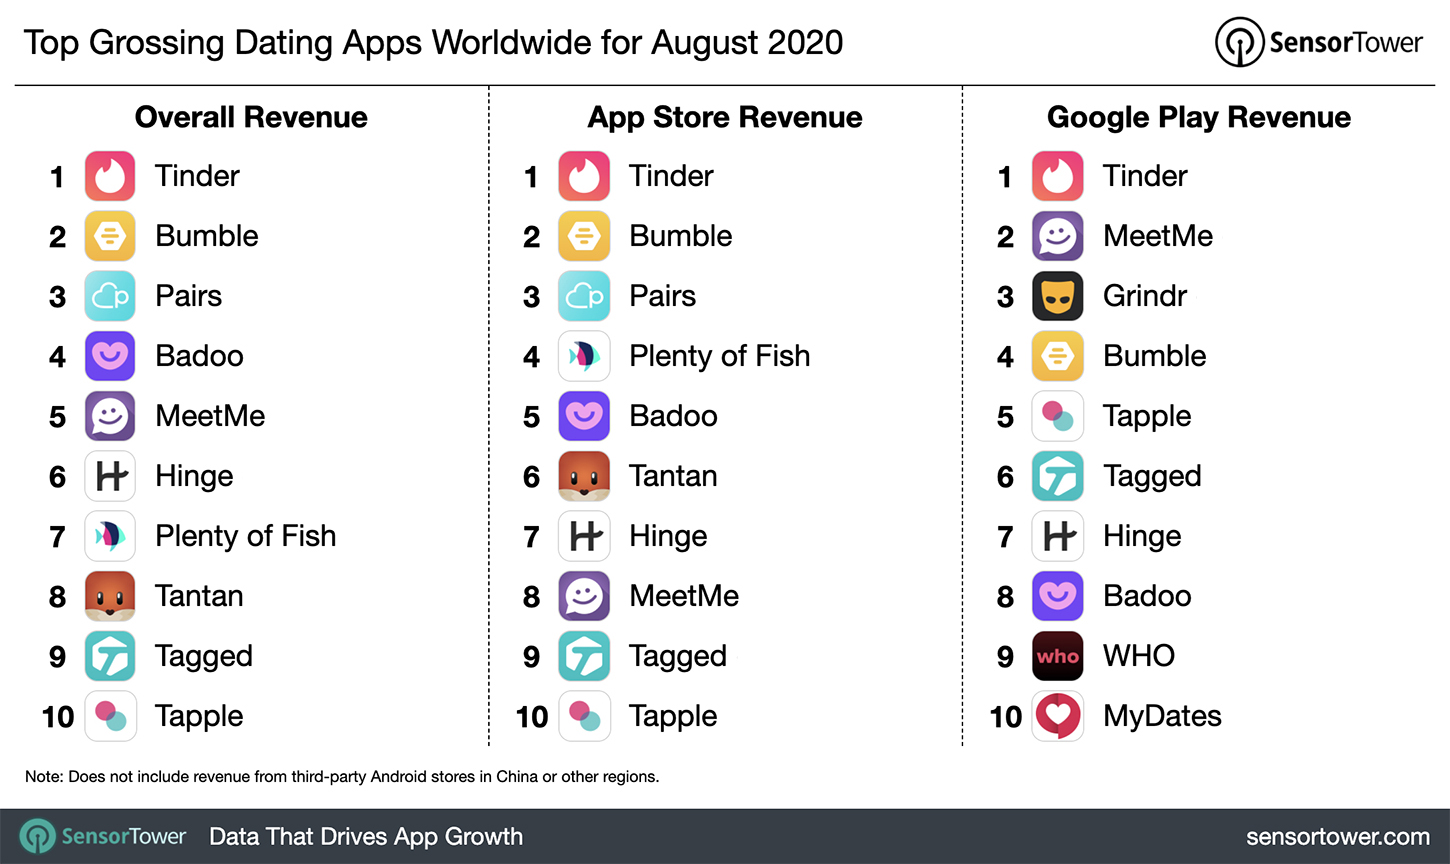 “Top Grossing Dating Apps Worldwide for August 2020